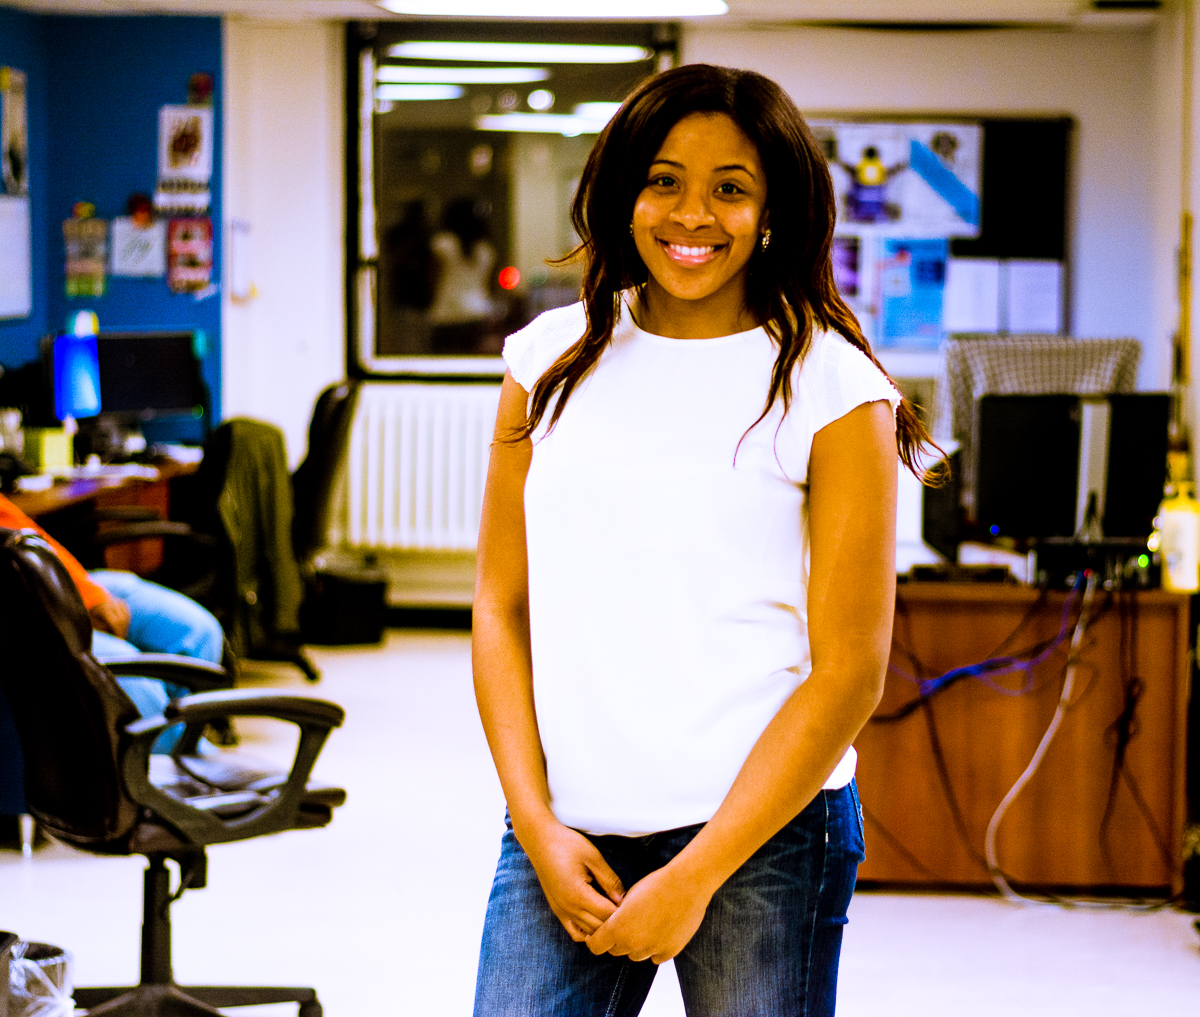 a smiling woman in jeans and a white T-shirt